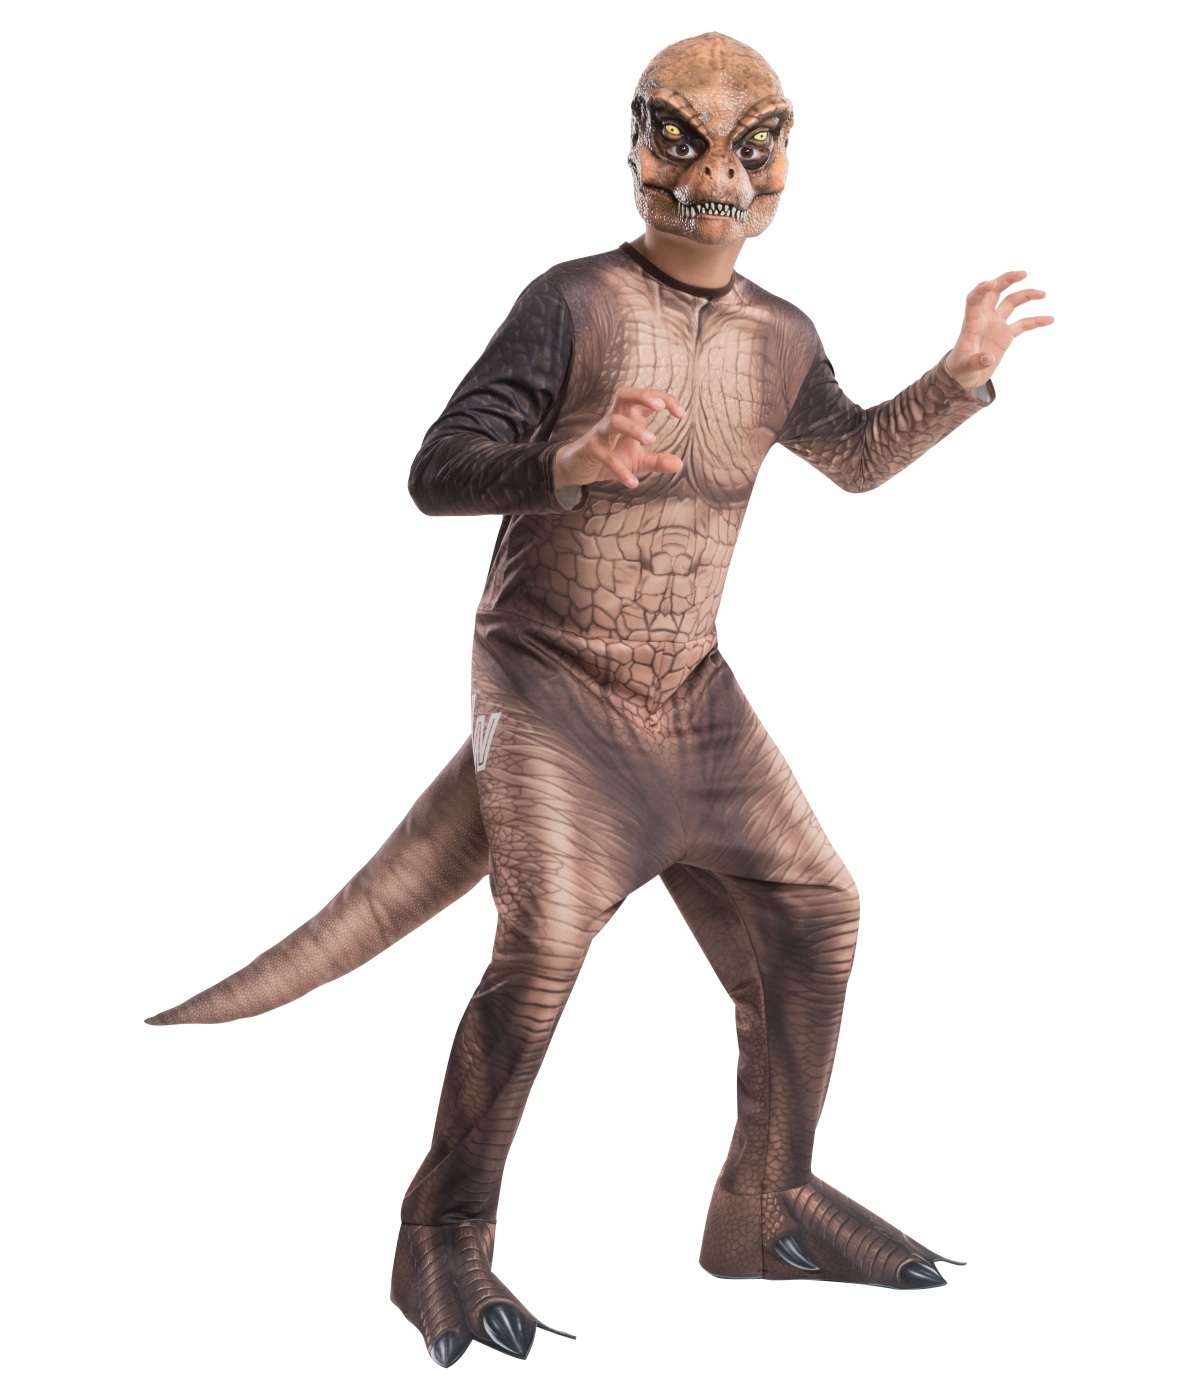 guy who made trex costume